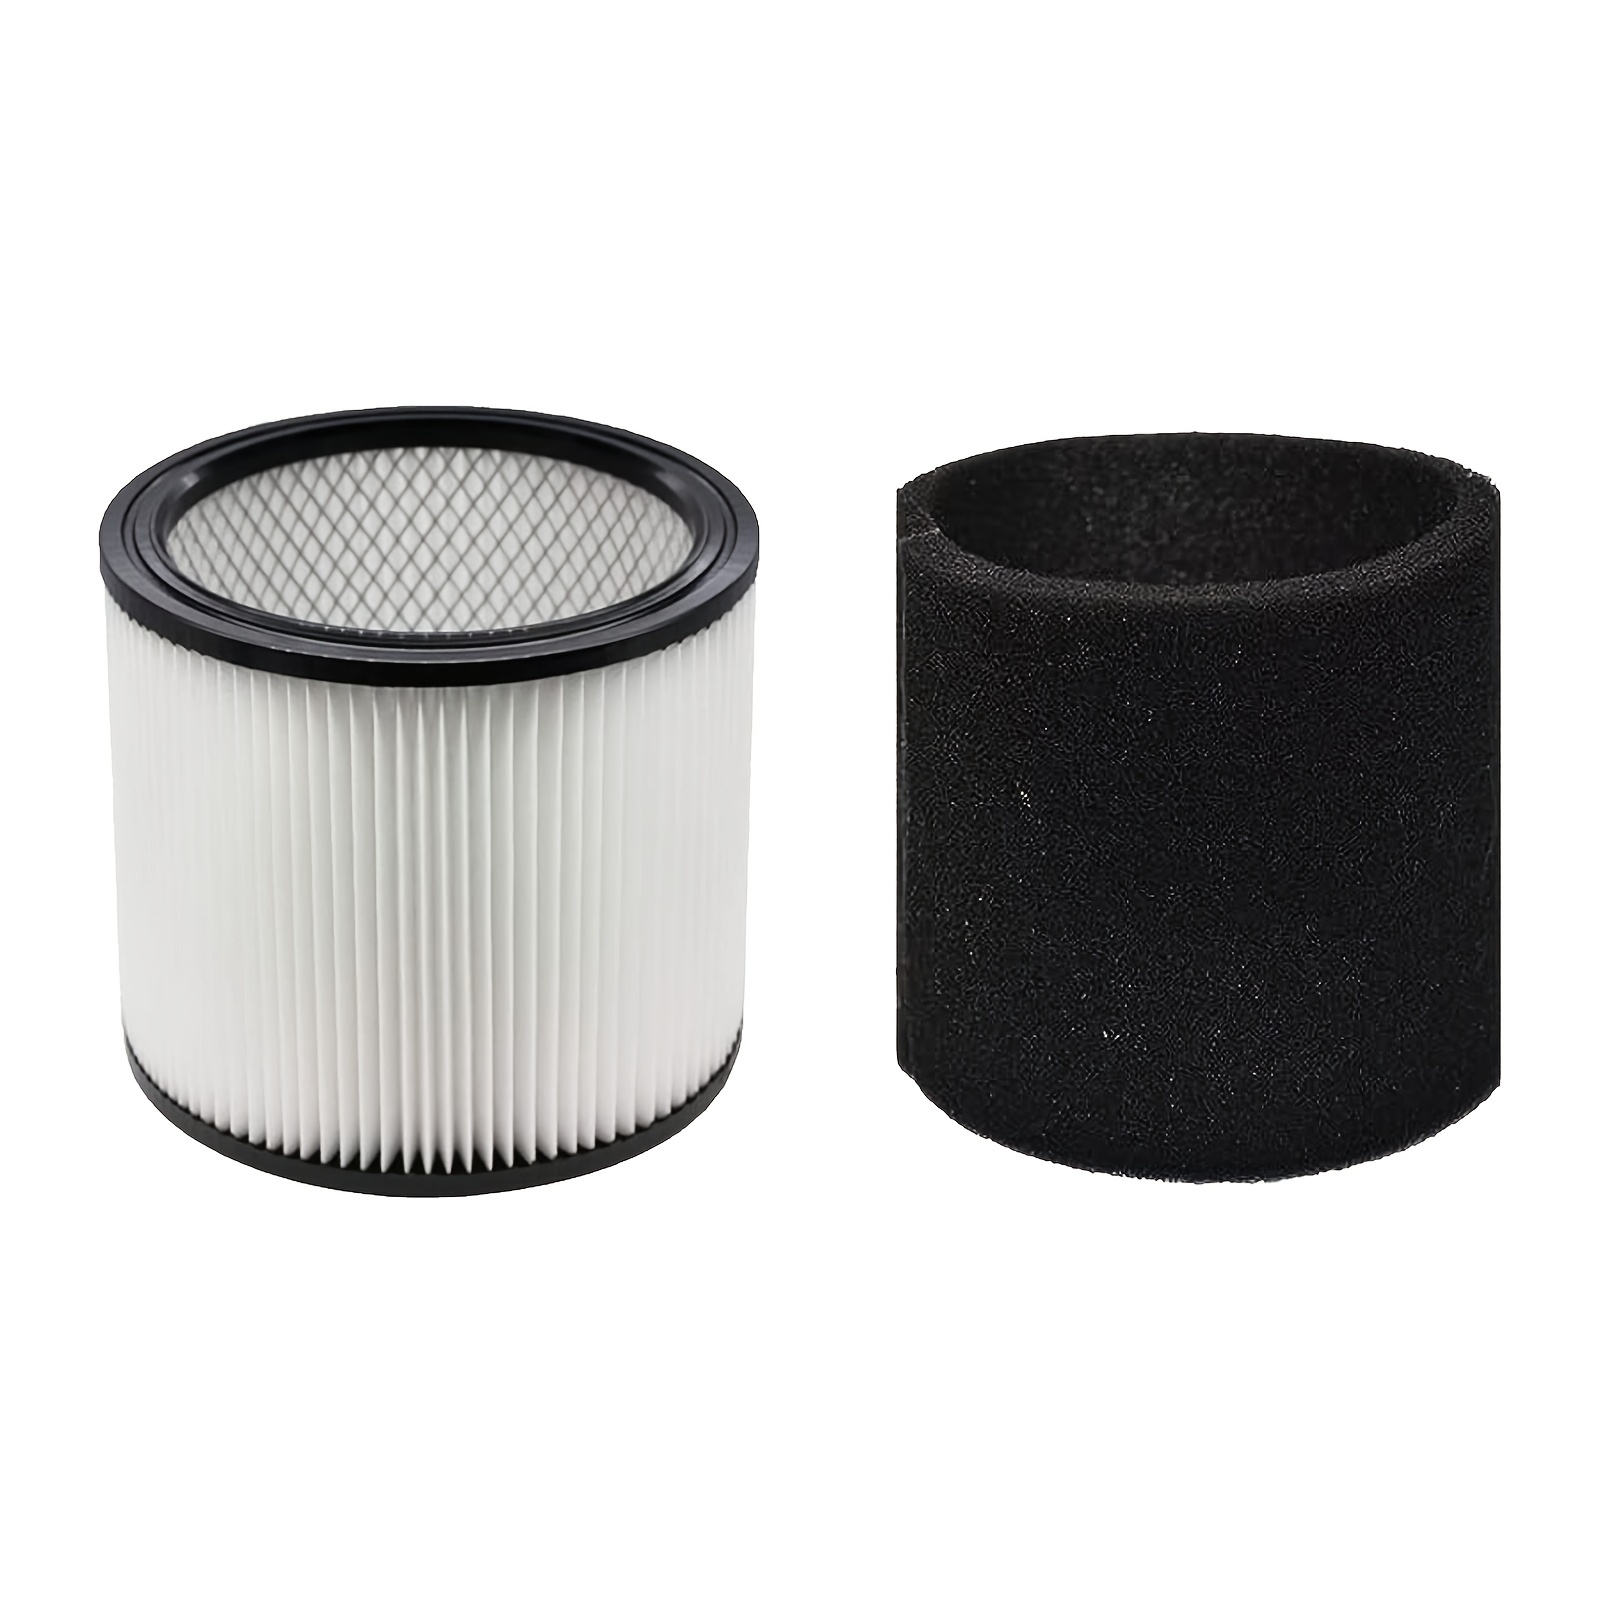 Dustbuster Replacement Vacuum Cleaner Filter for Black & Decker Power Tools  Vf110 - China HEPA Filter, Power Tools Vf110